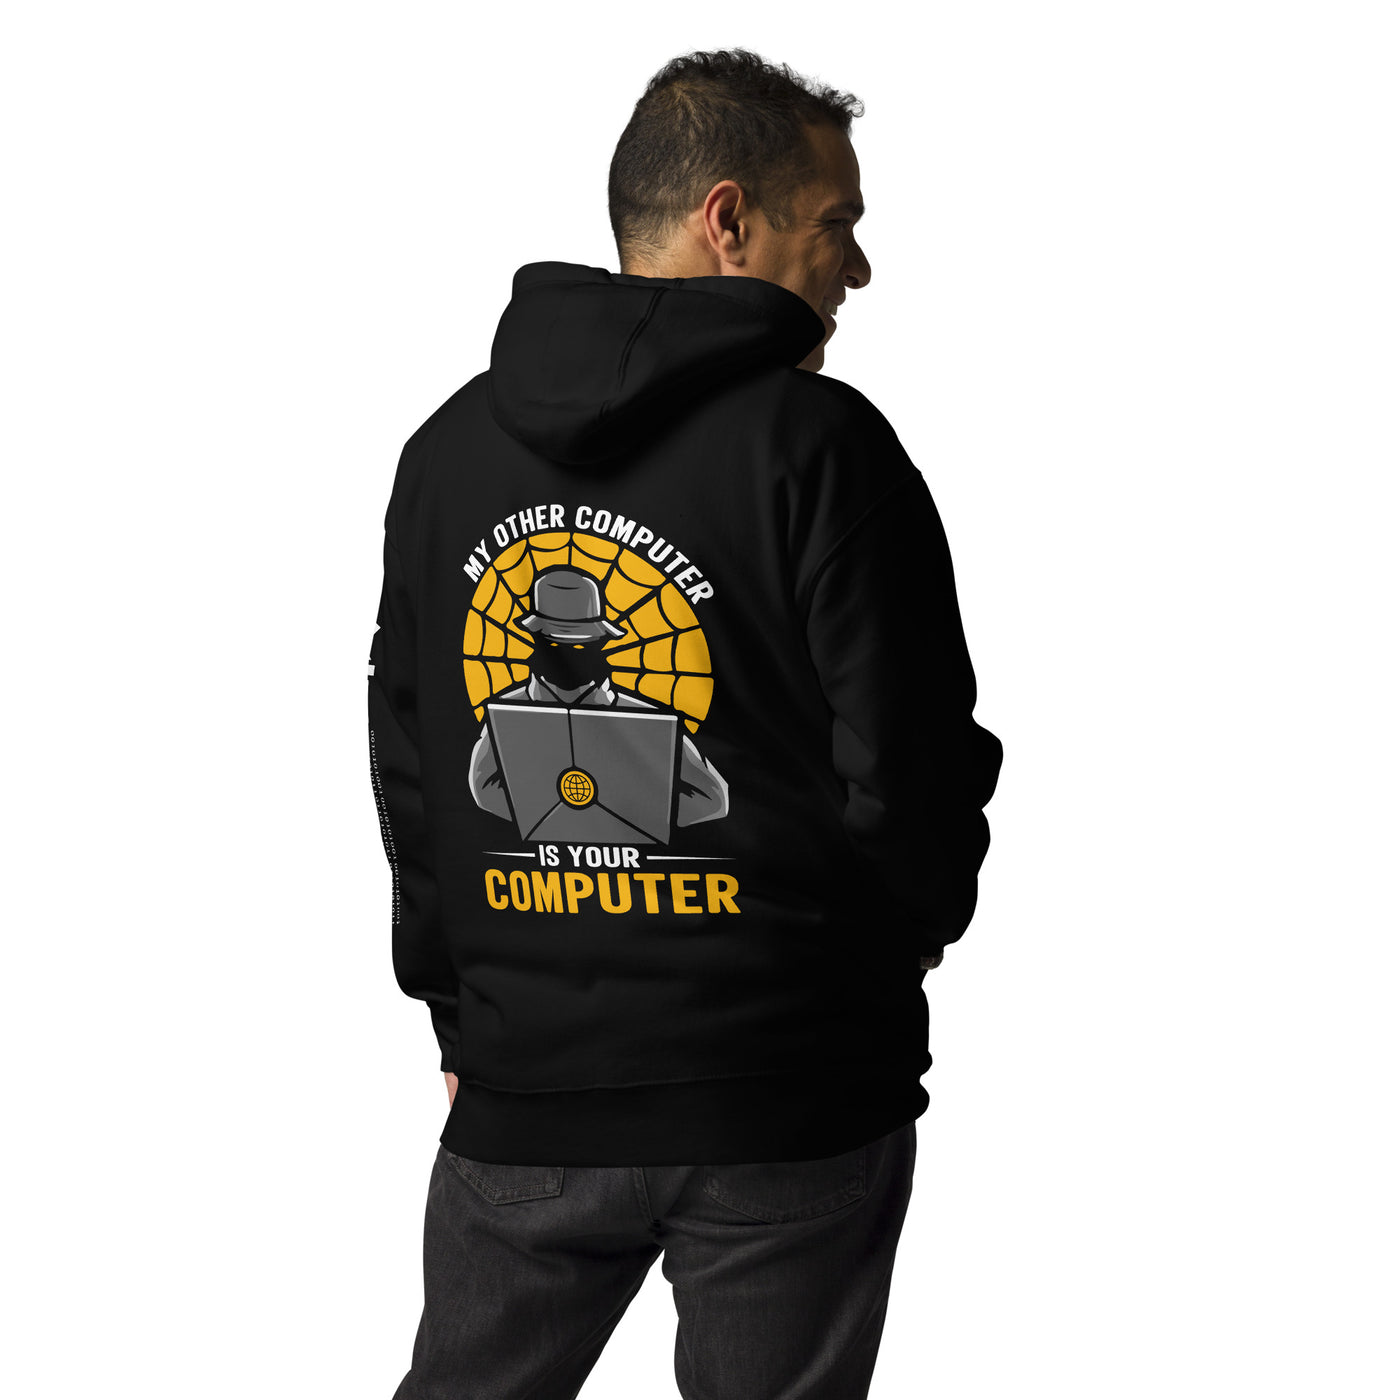 My Other Computer is Your Computer V1 - Unisex Hoodie